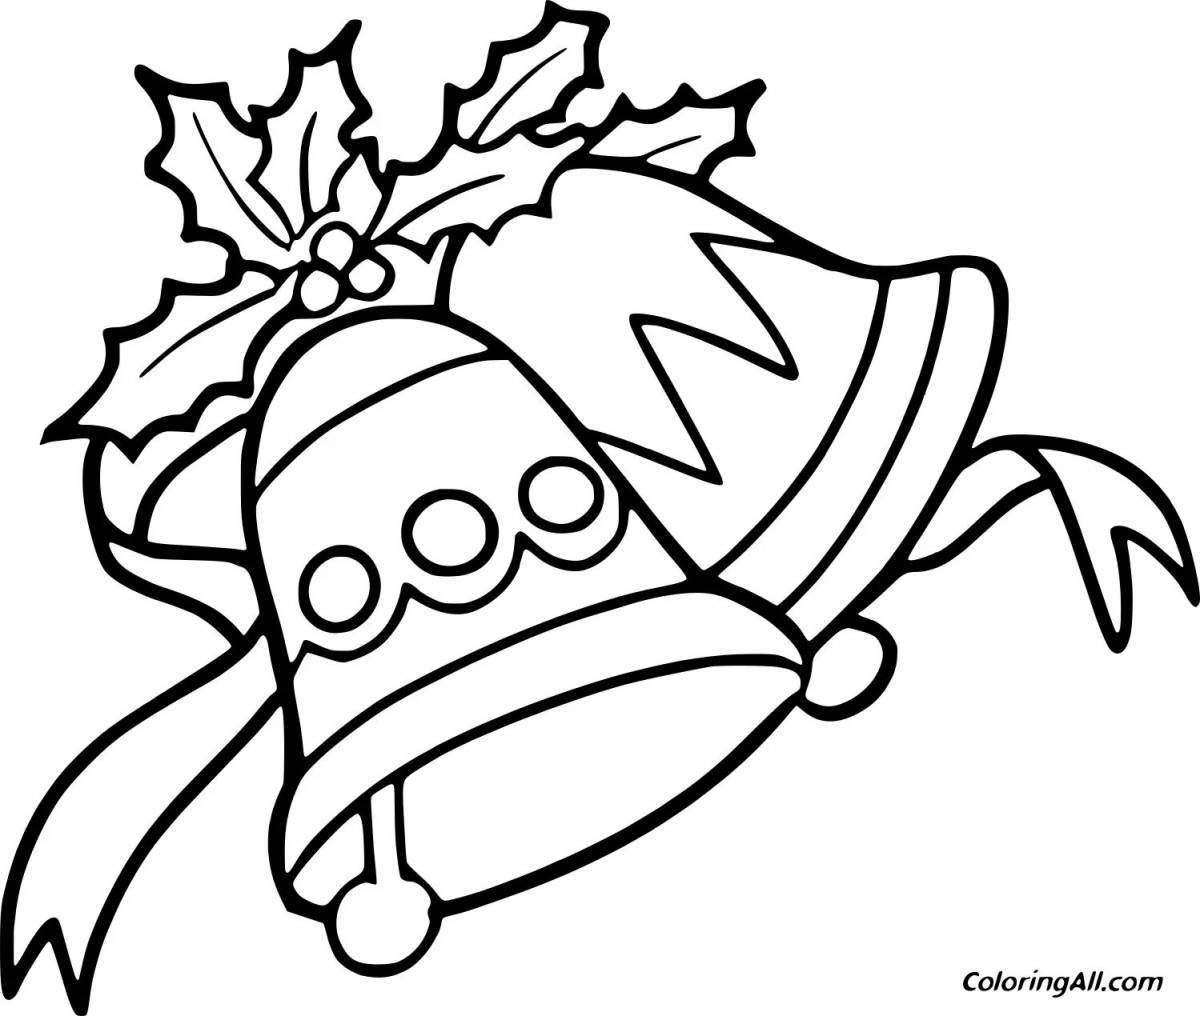 Glorious bells coloring page